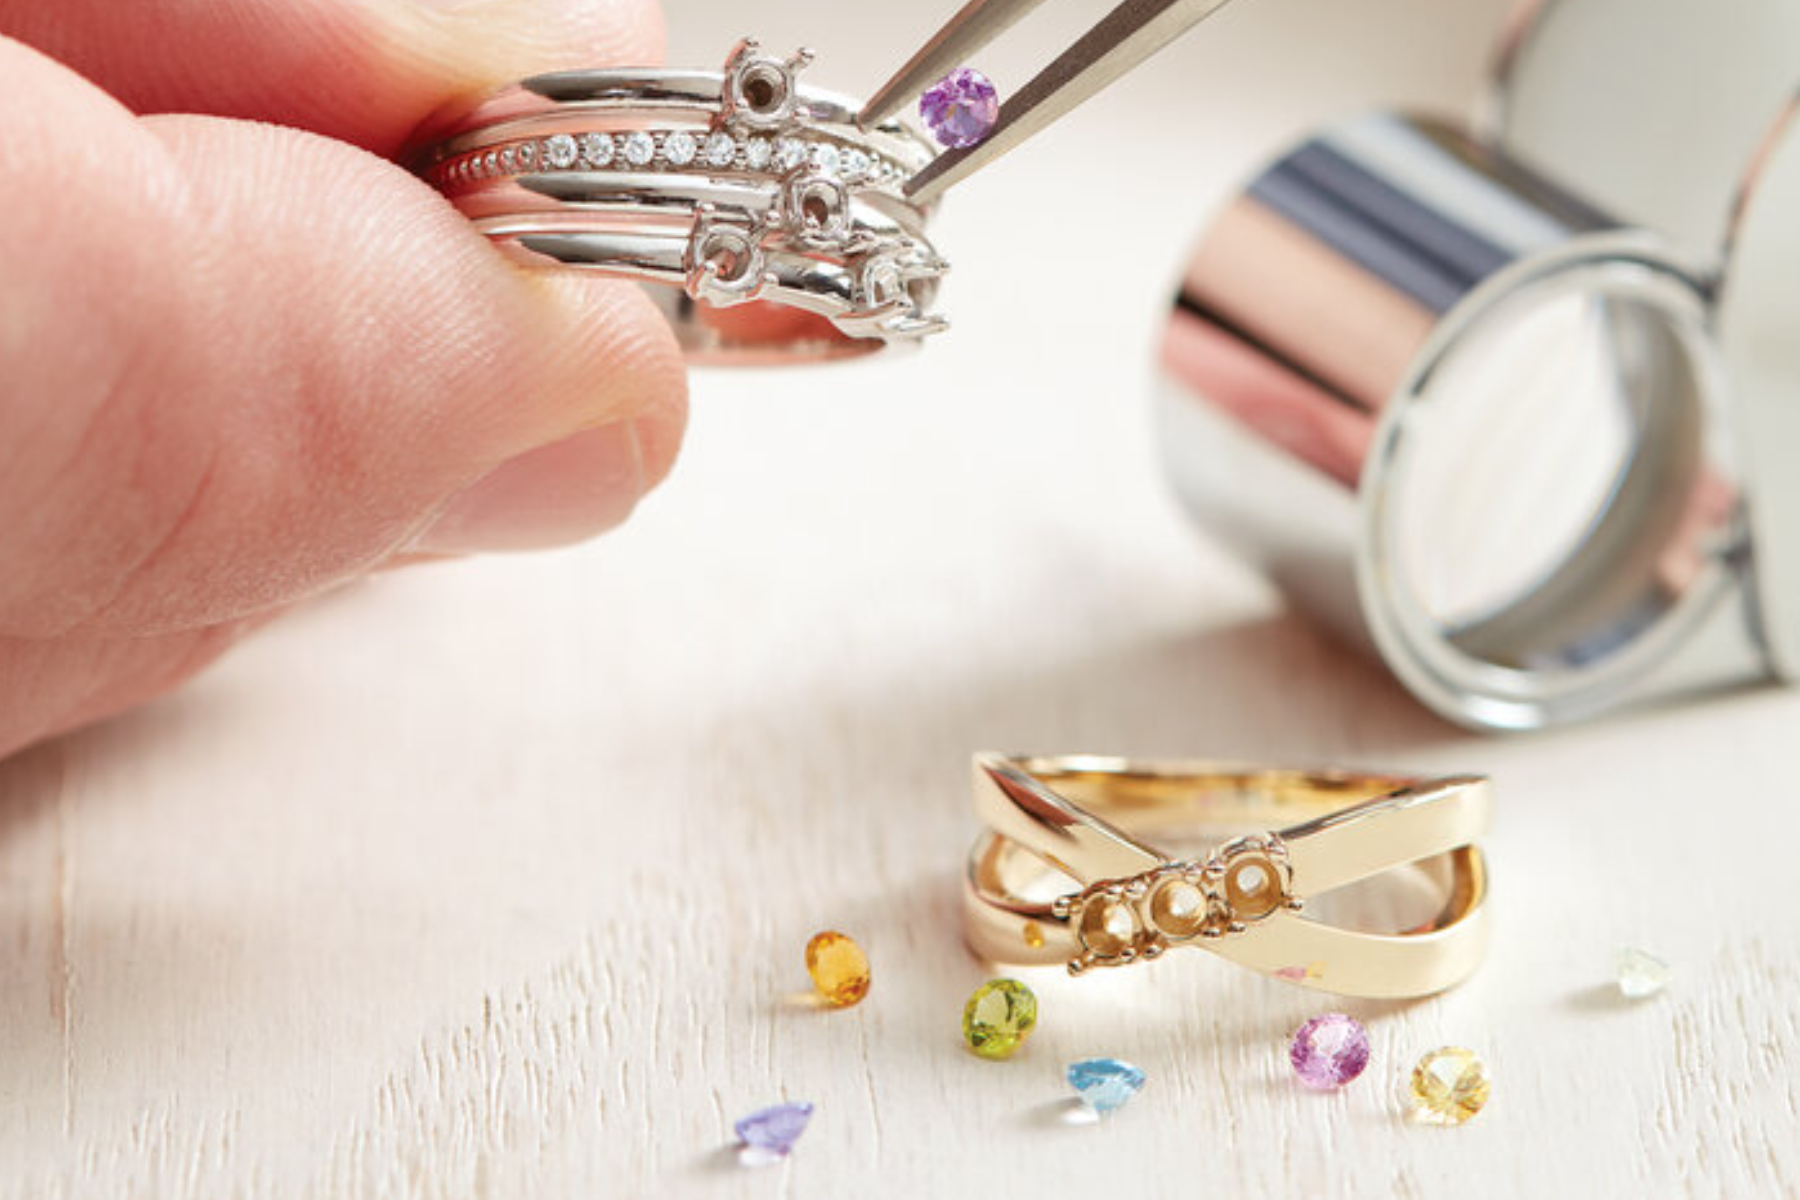 A person's hand placing colorful stones on a customized ring